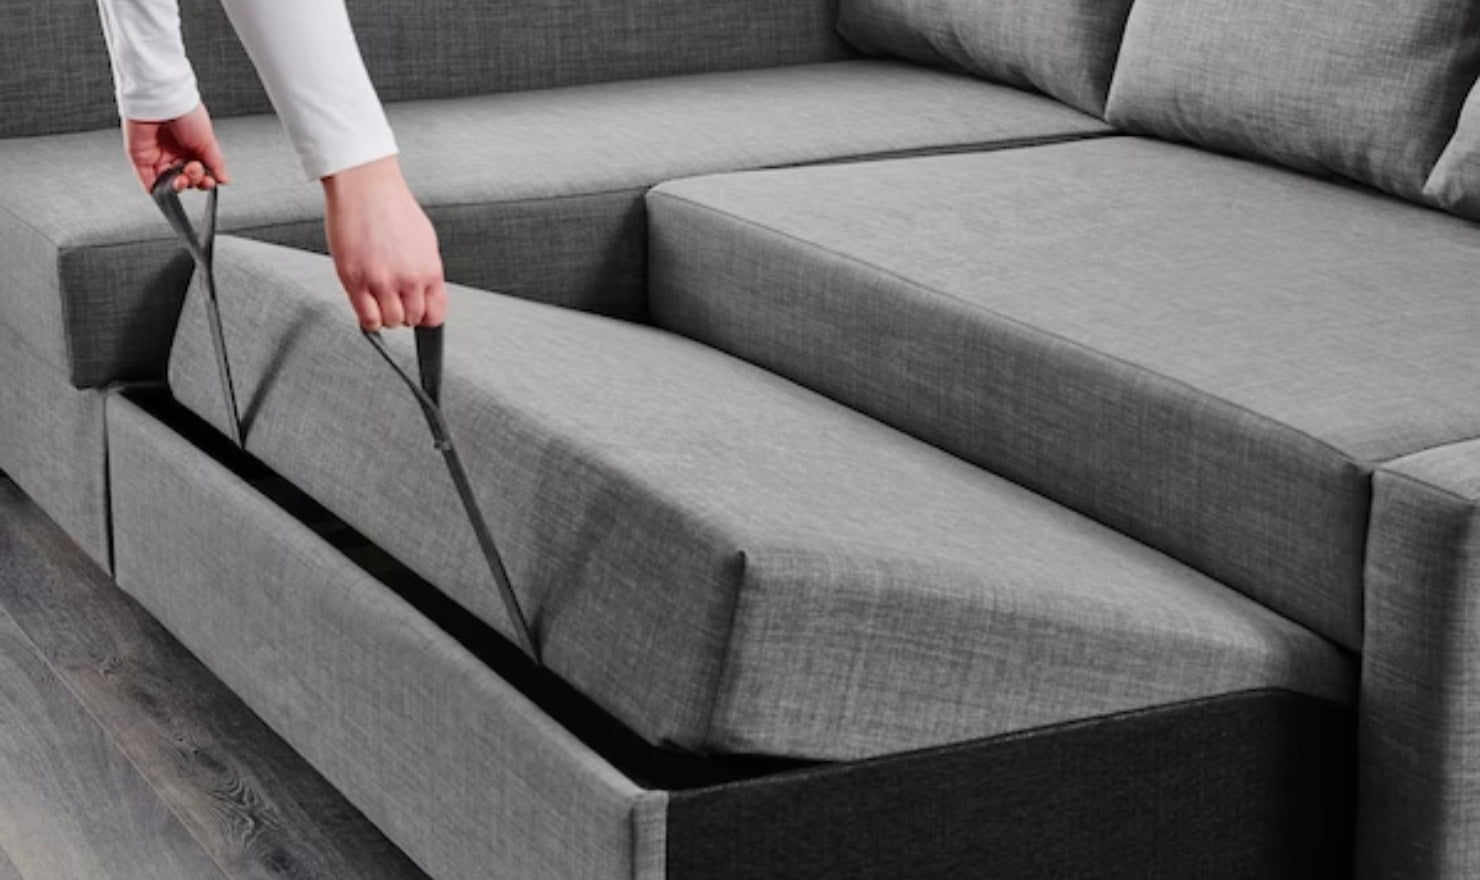 Sofa Beds Vs Futons - Which one is durable